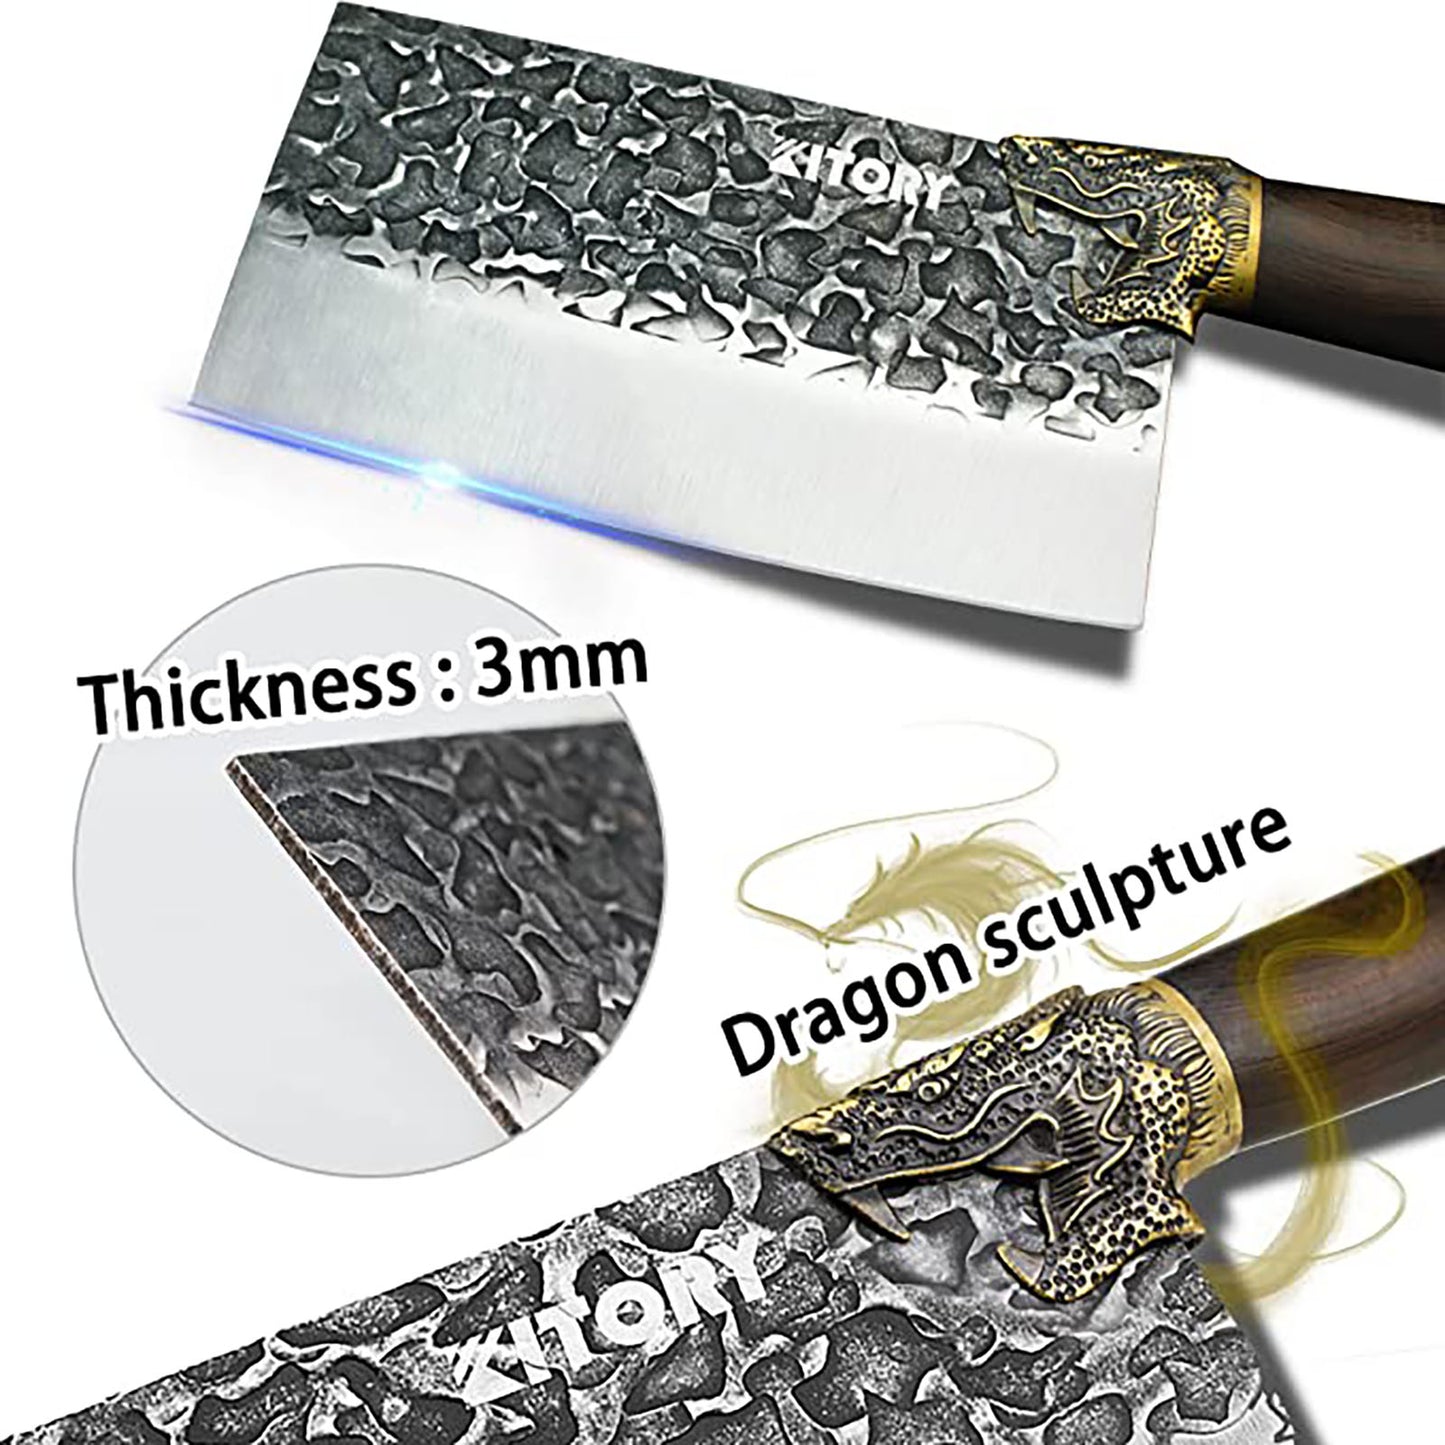 Kitory Handmade Chinese Knife Forged High Carbon Steel